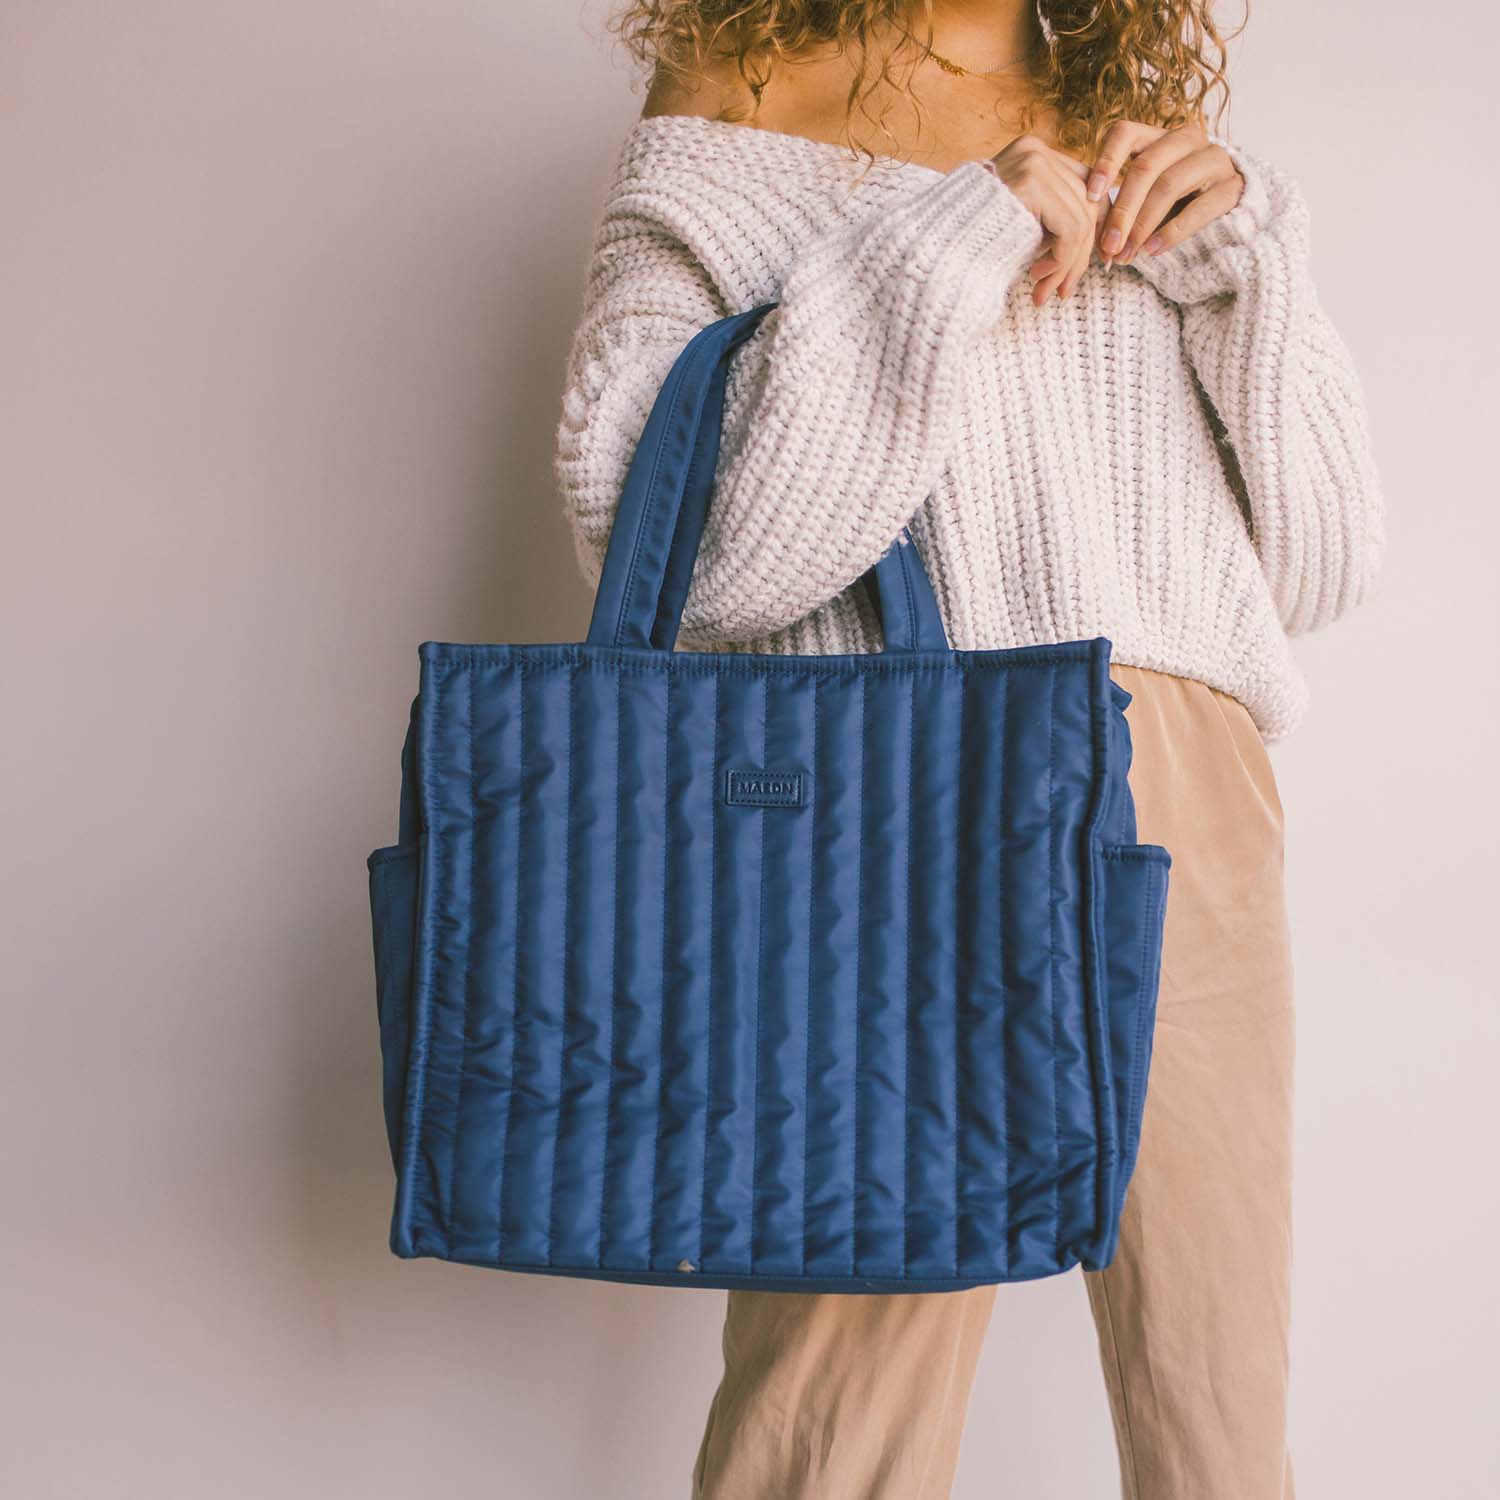 Convertible Travel Totes - Māedn Bags